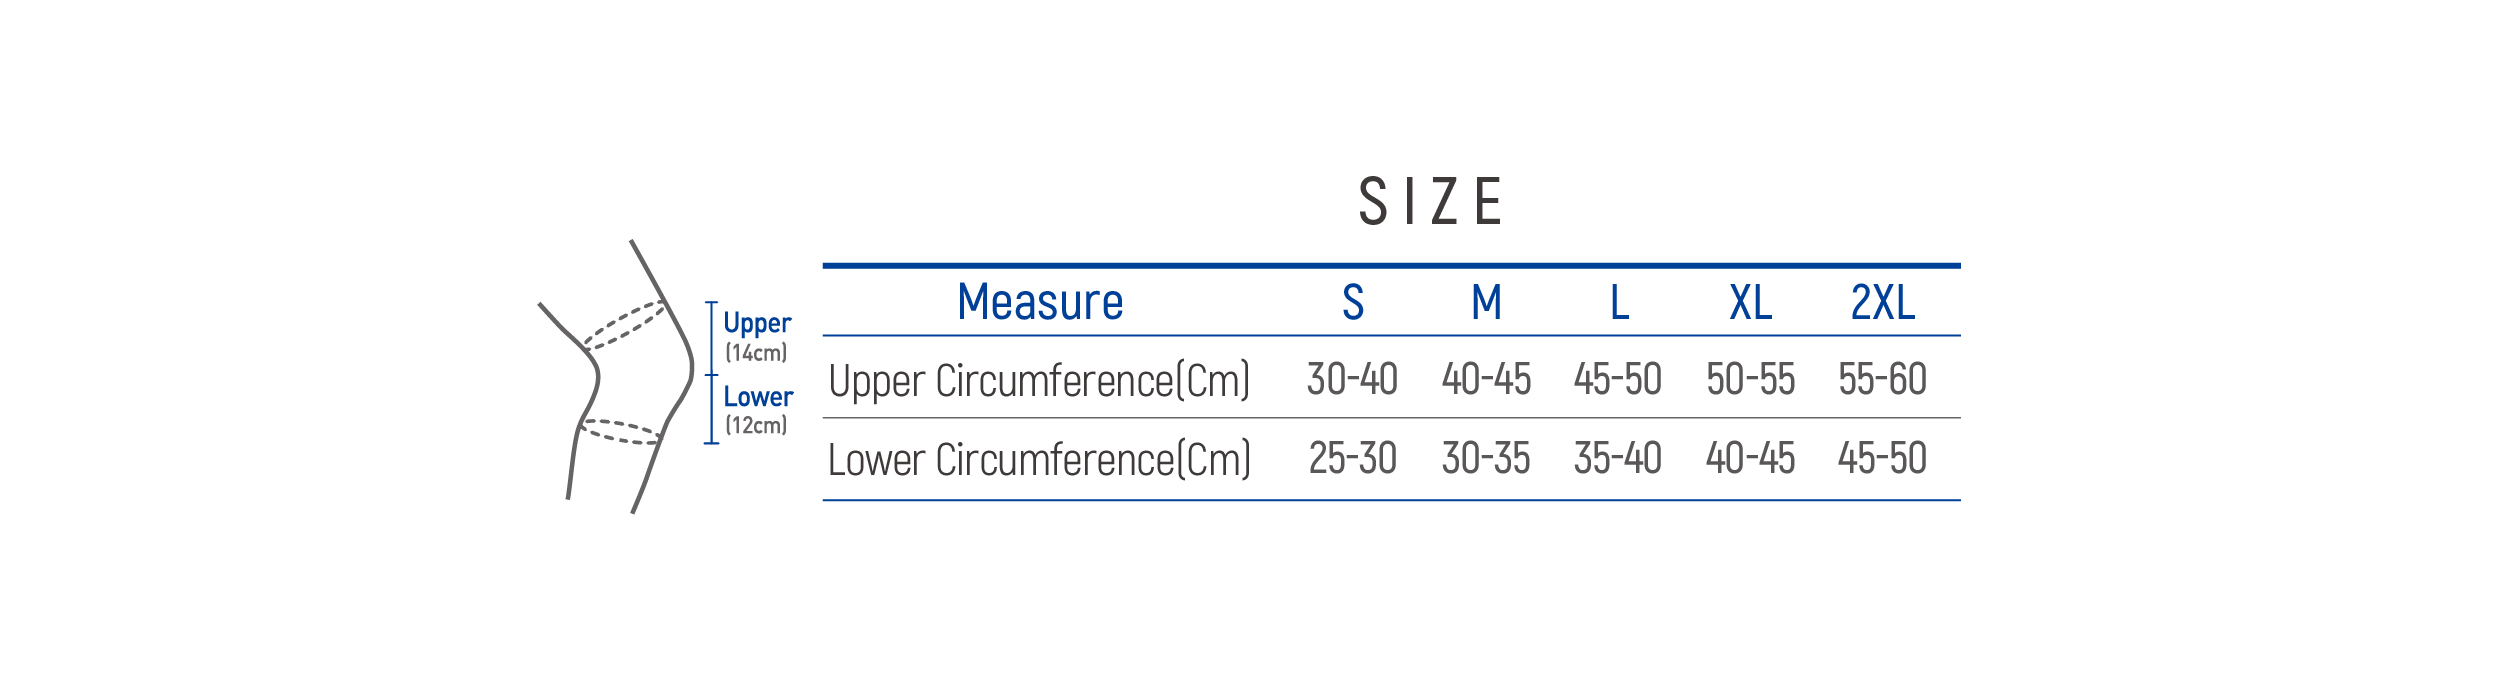 DR-K034 Size table image